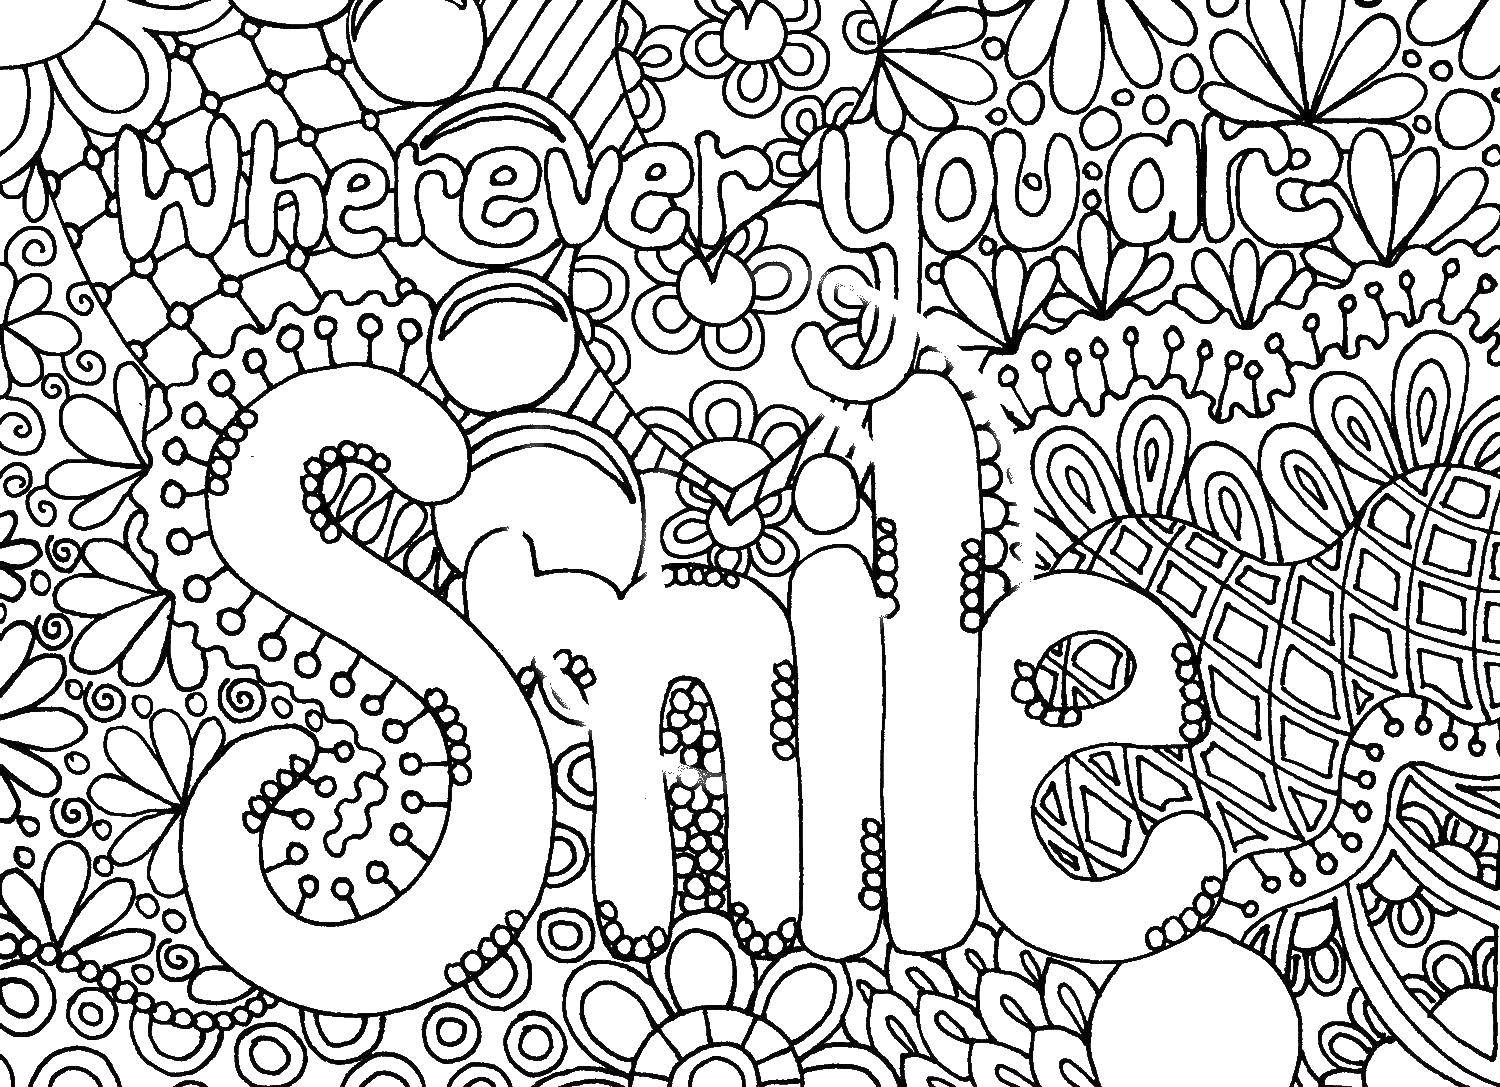 Coloring Smile. Category coloring. Tags:  labels, patterns, flowers, smile.